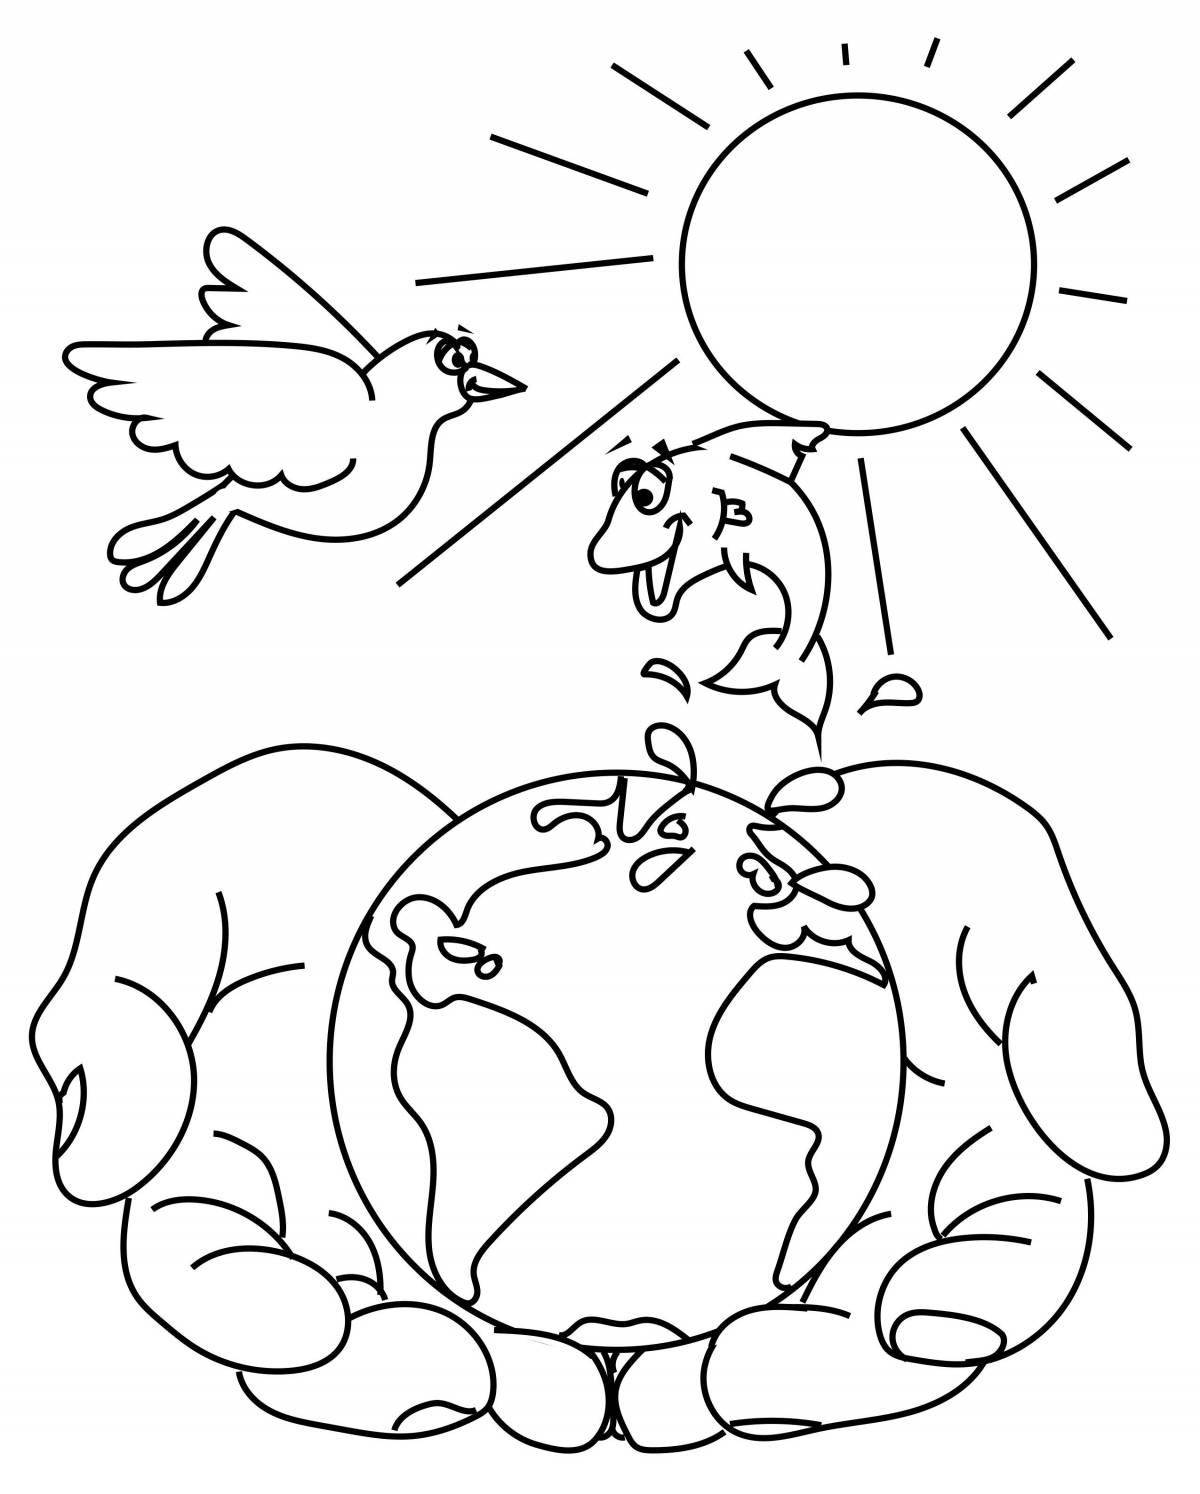 Coloring book bright world without war